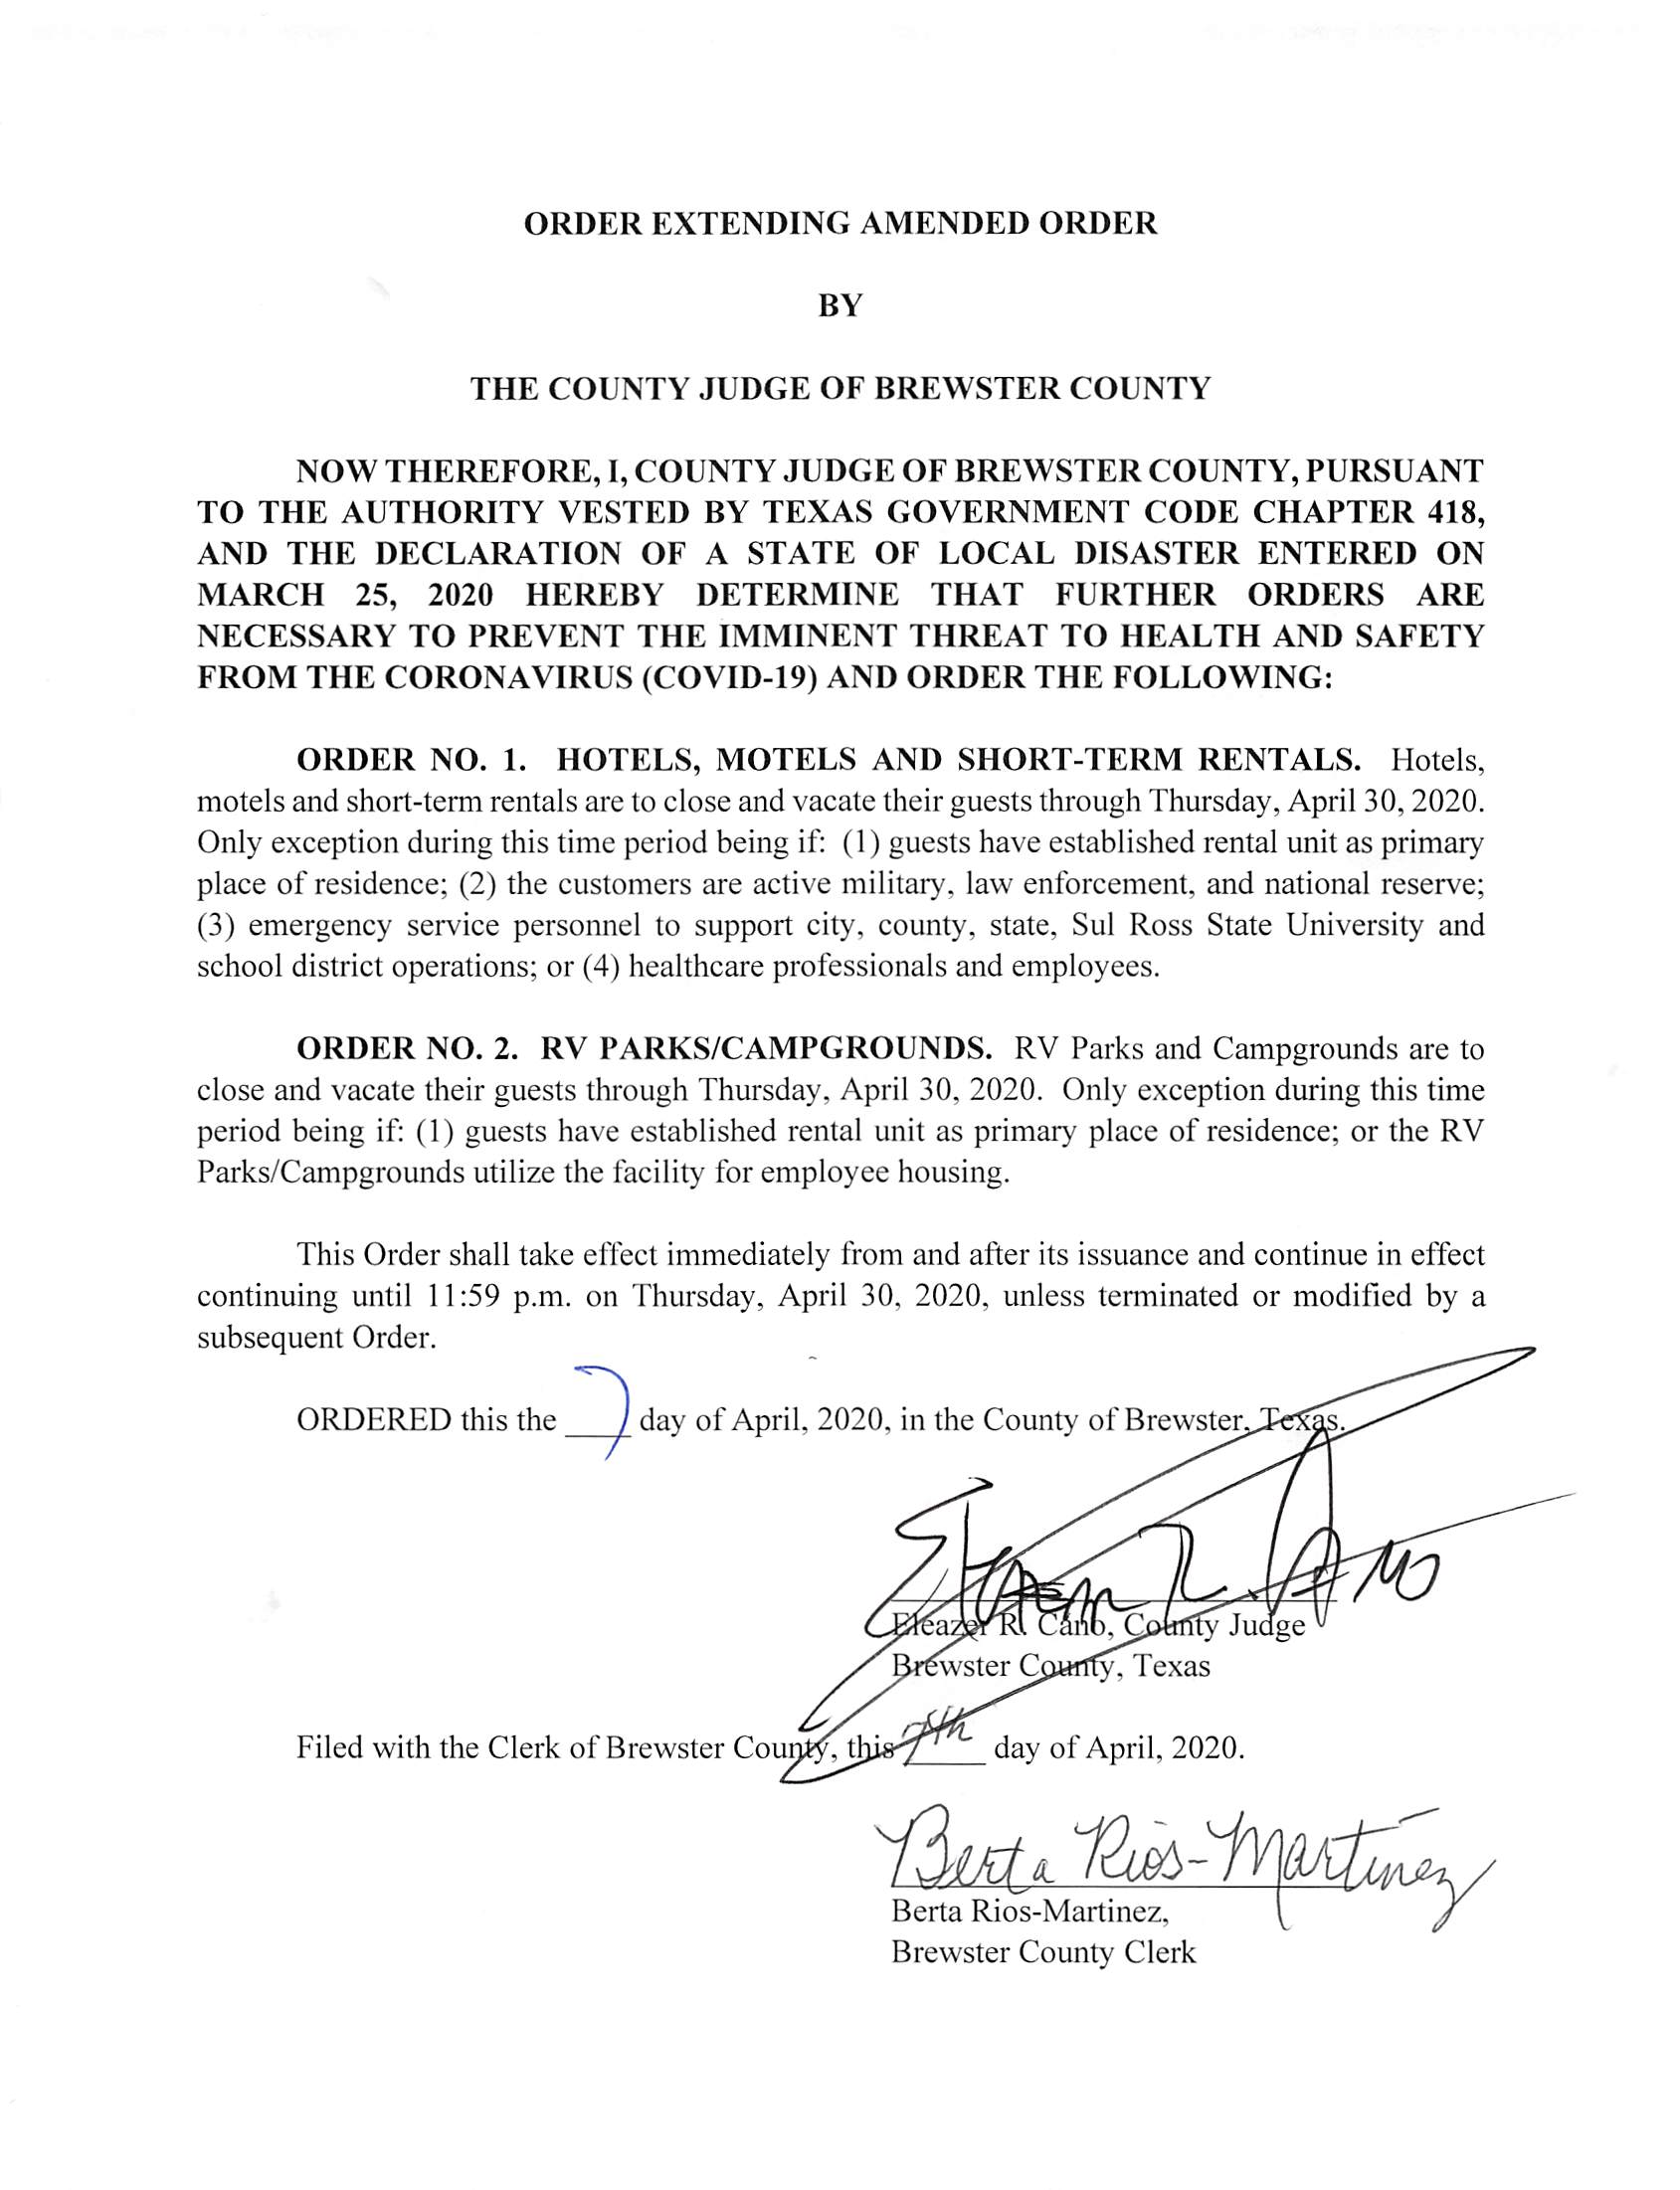 Orders Extending Supplemental on Shelter in Place & Declaration (1)_Page_1